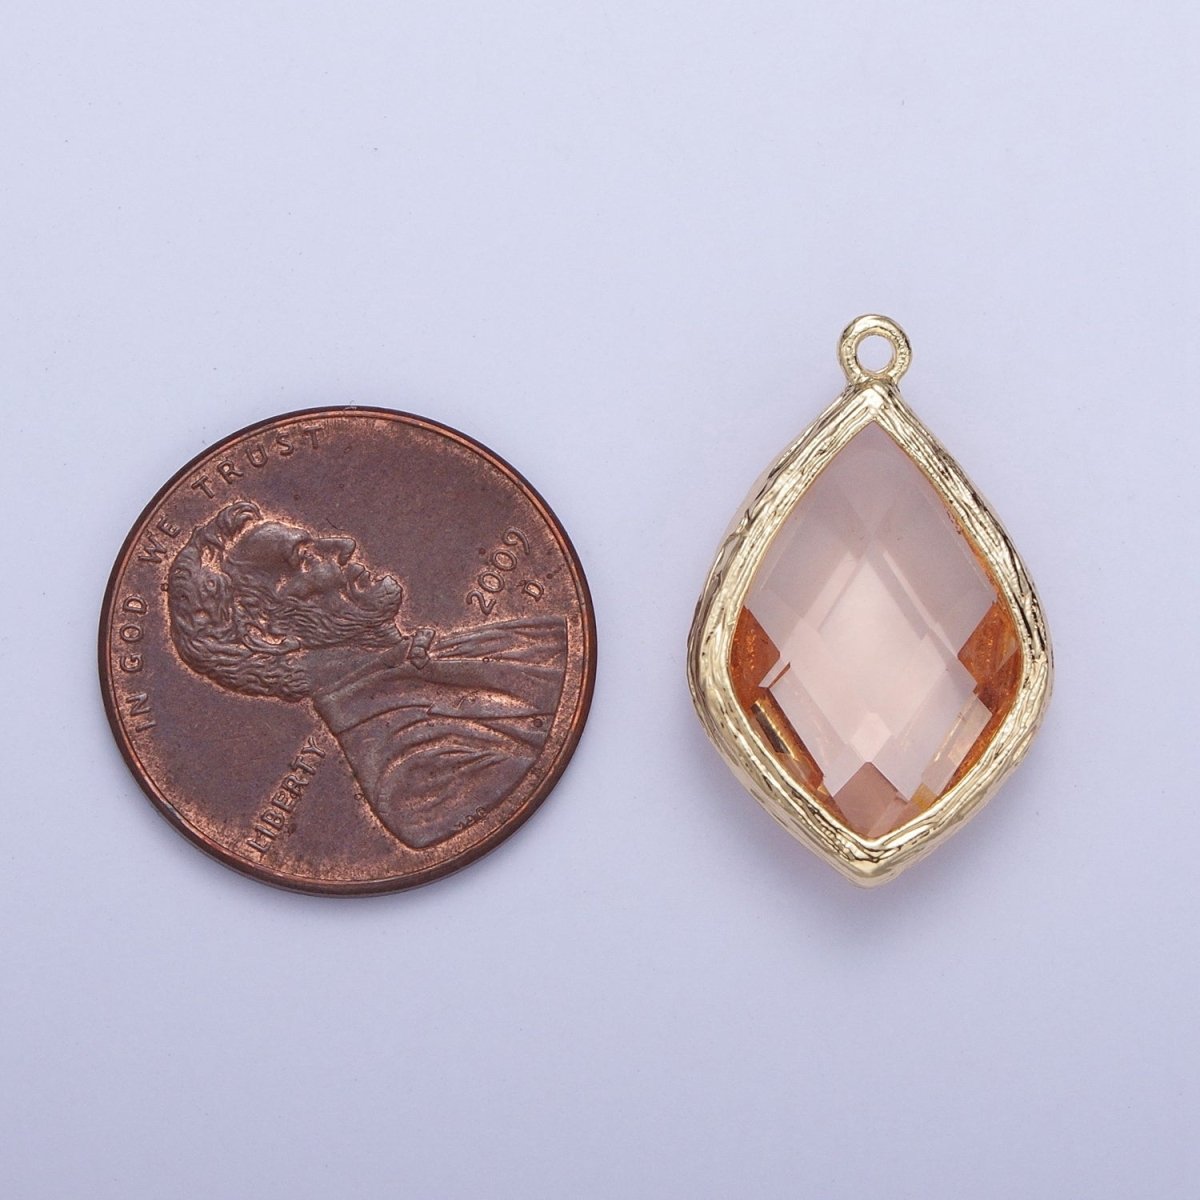 Teardrop Milky White & Peach Cubic Zirconia Gold Charm For Jewelry Necklace Bracelet Component AG-005 AG-006 - DLUXCA